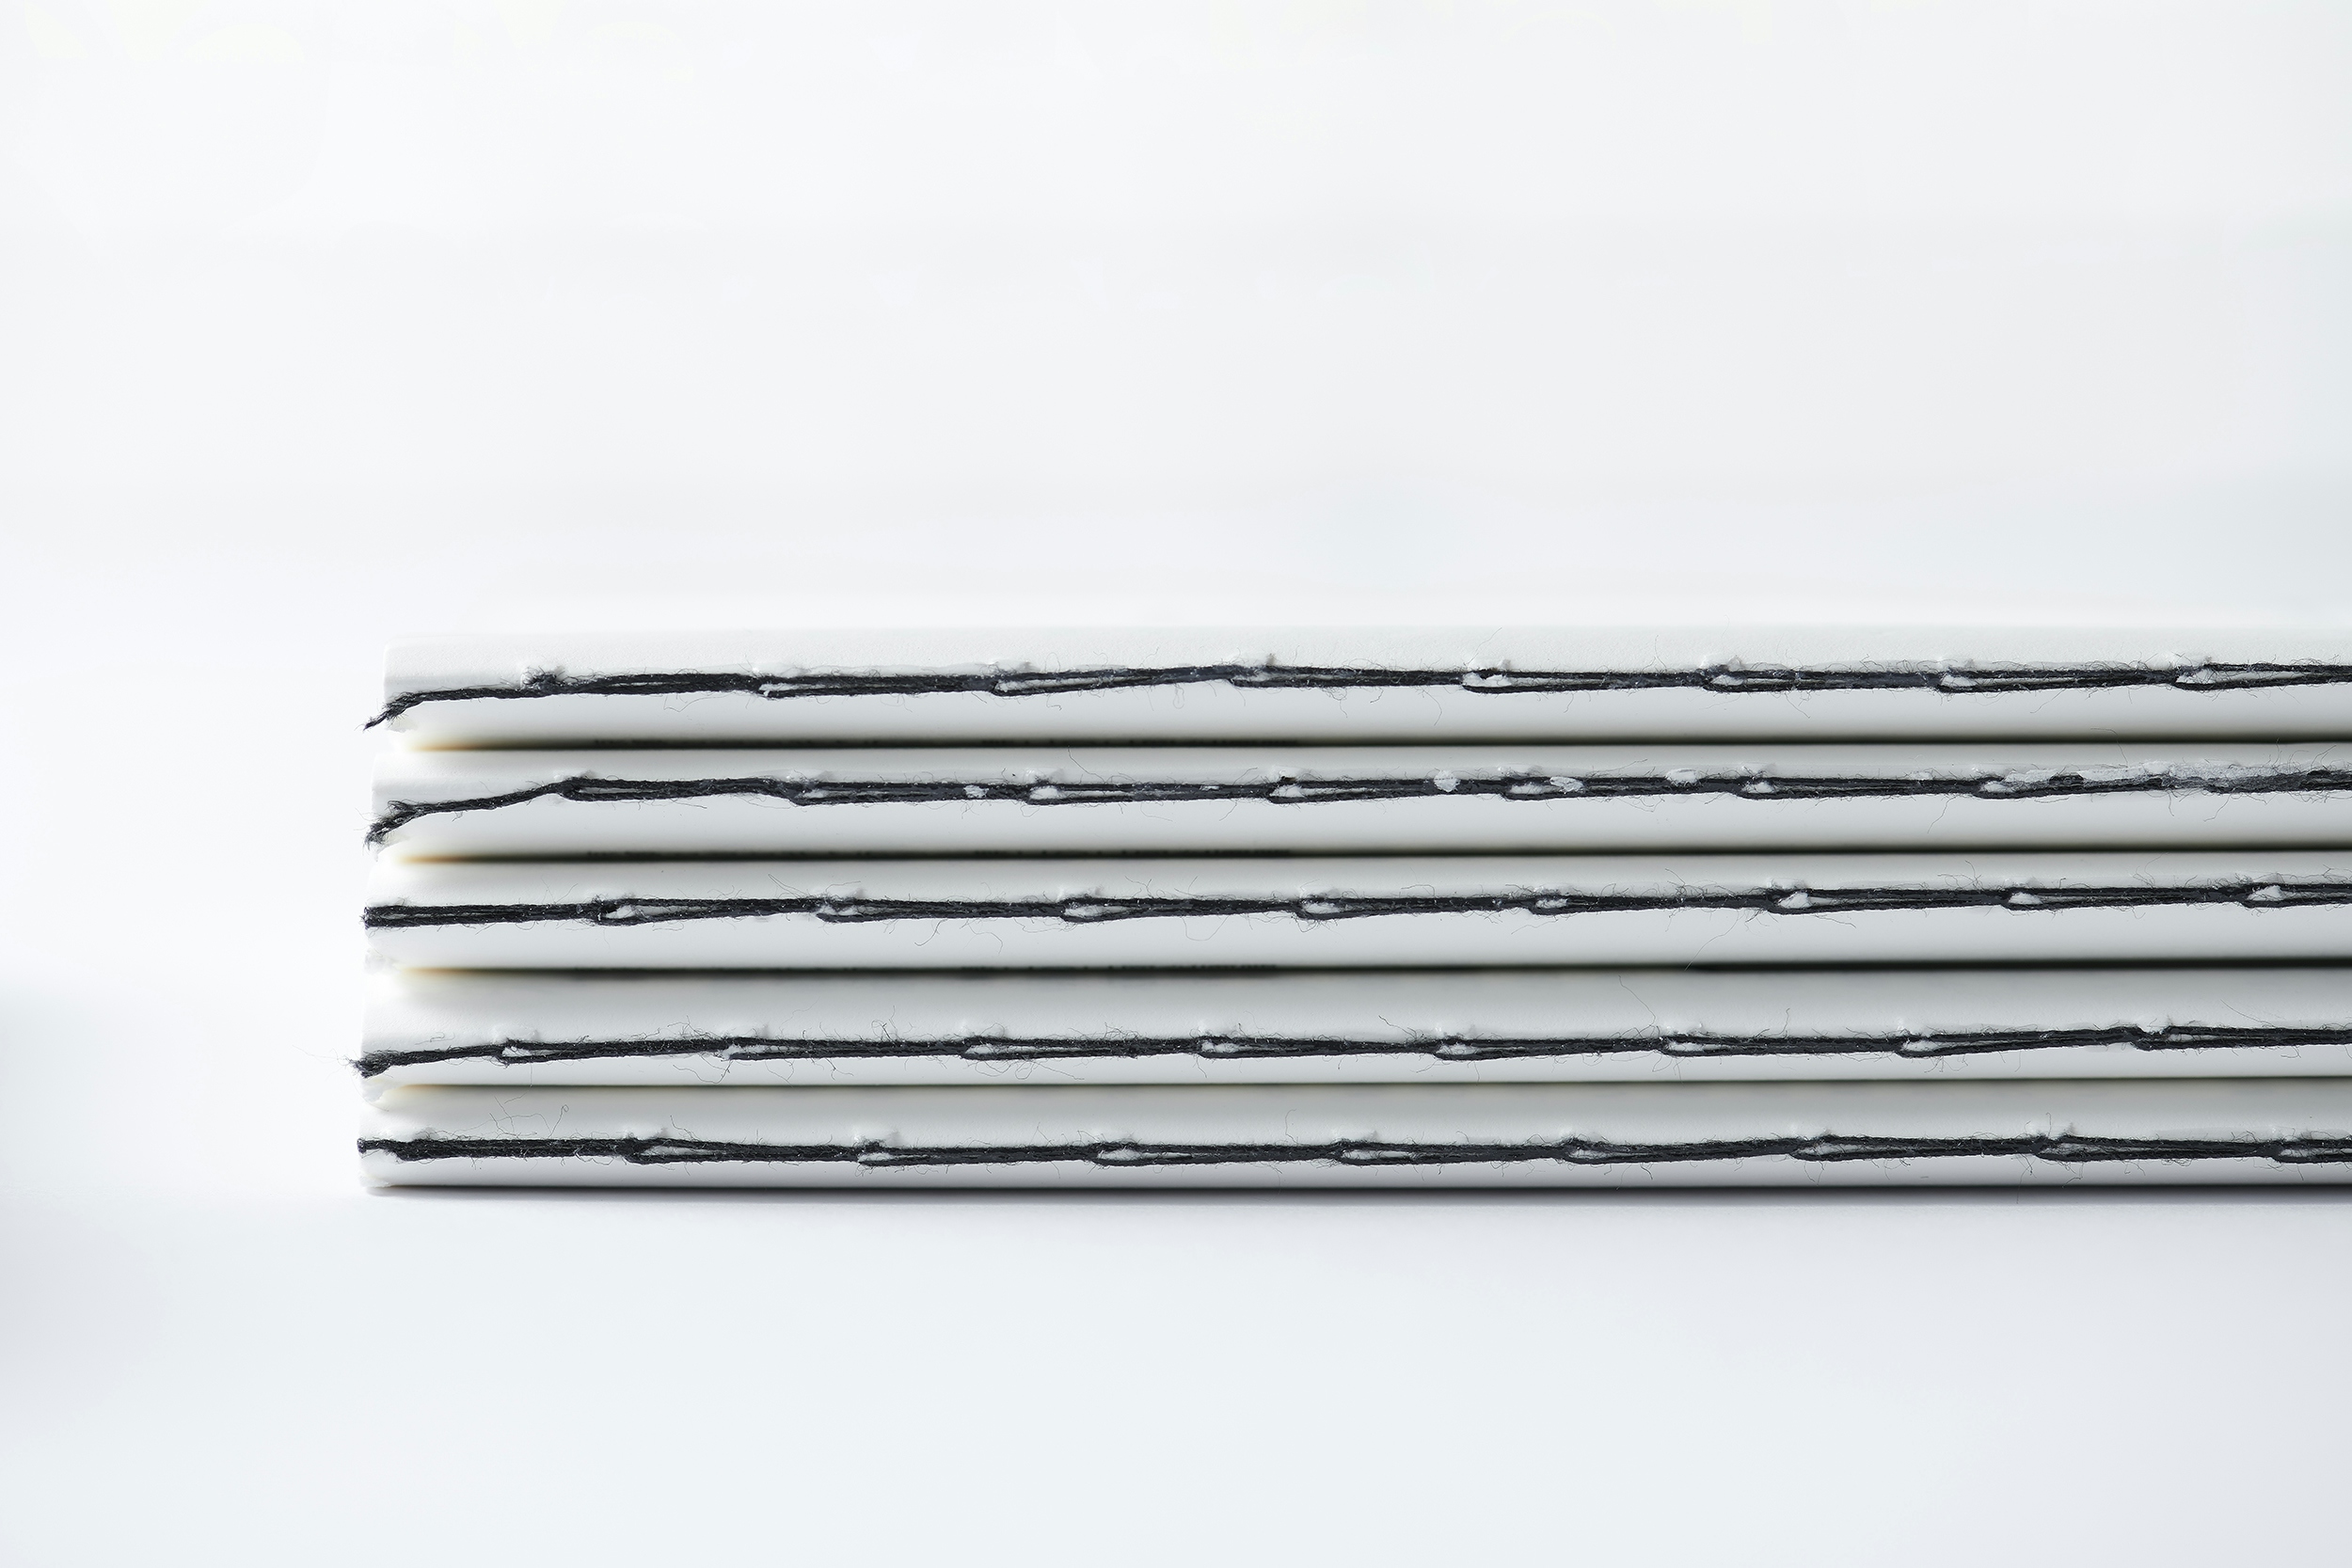 Lars Müller BOOKS – Analogue Reality booklet spine showing the saddle stitch